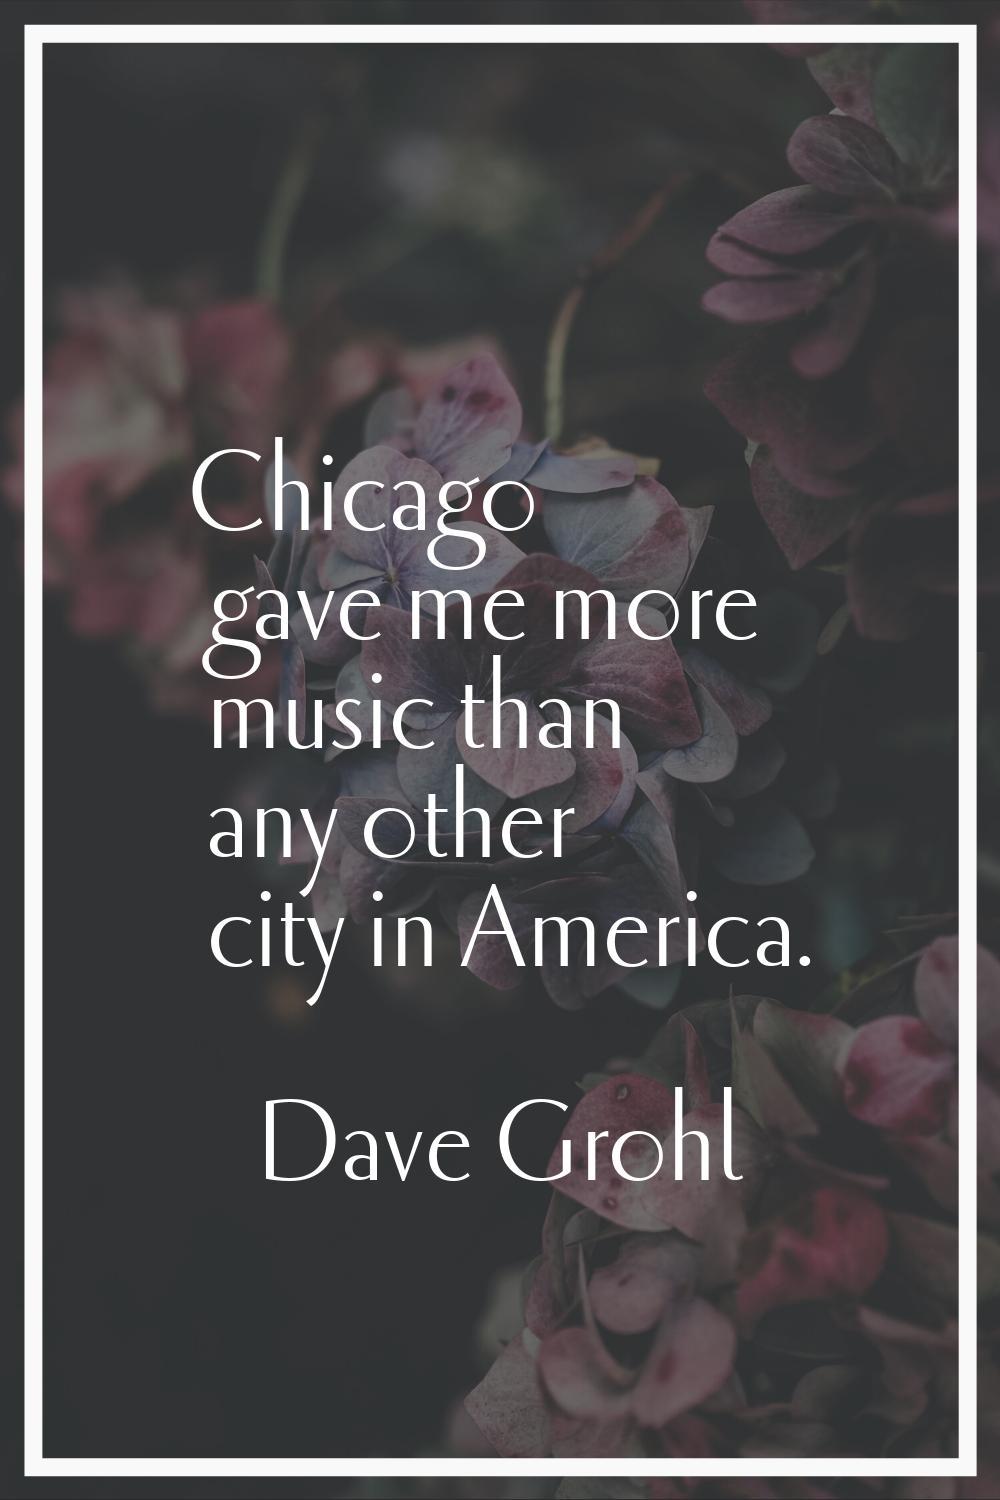 Chicago gave me more music than any other city in America.